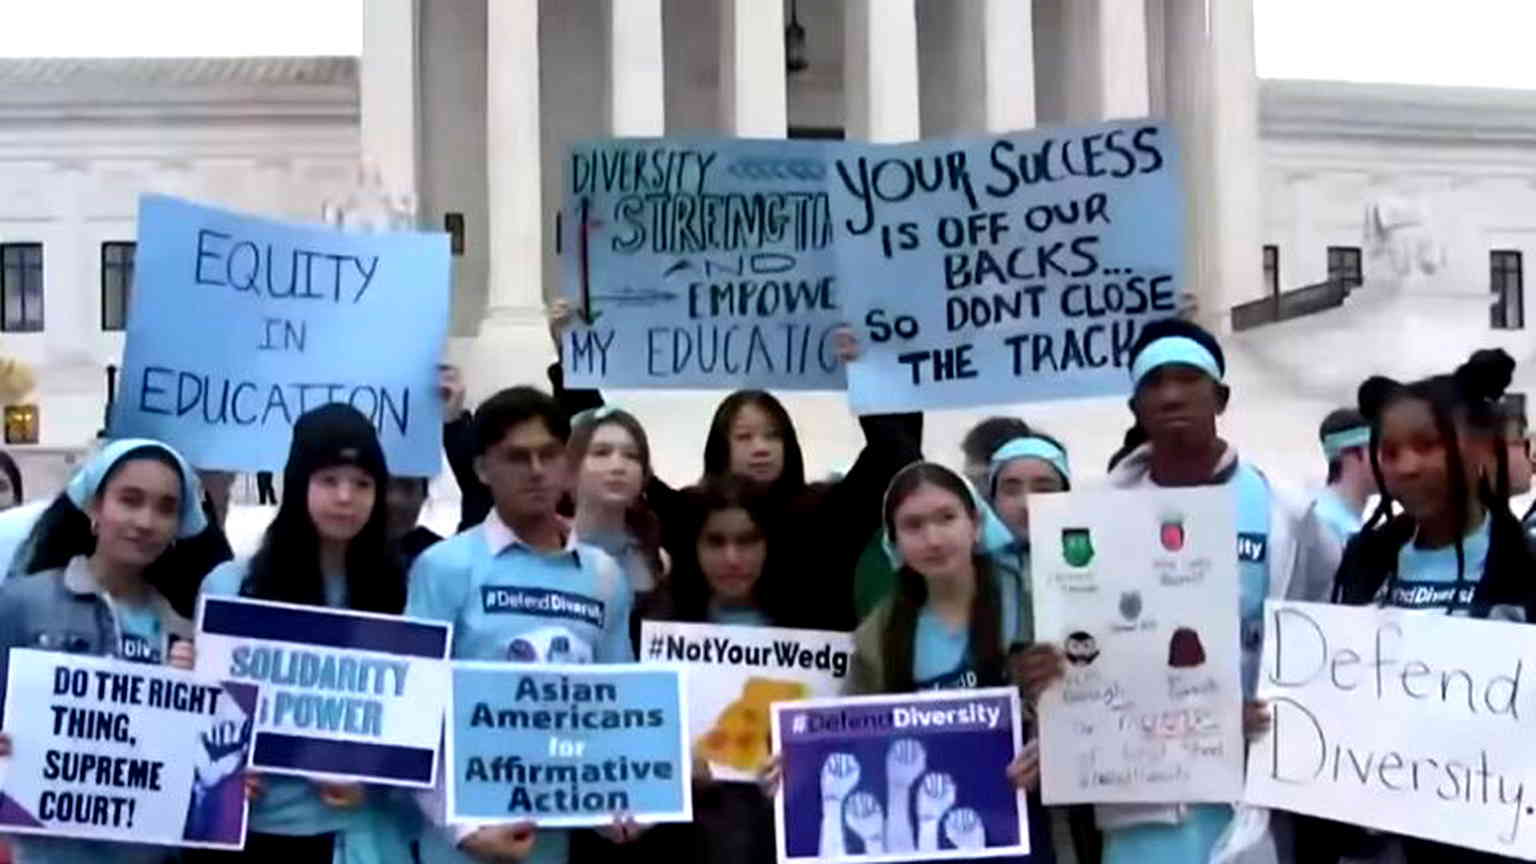 Most Americans remain opposed to affirmative action, new poll reveals